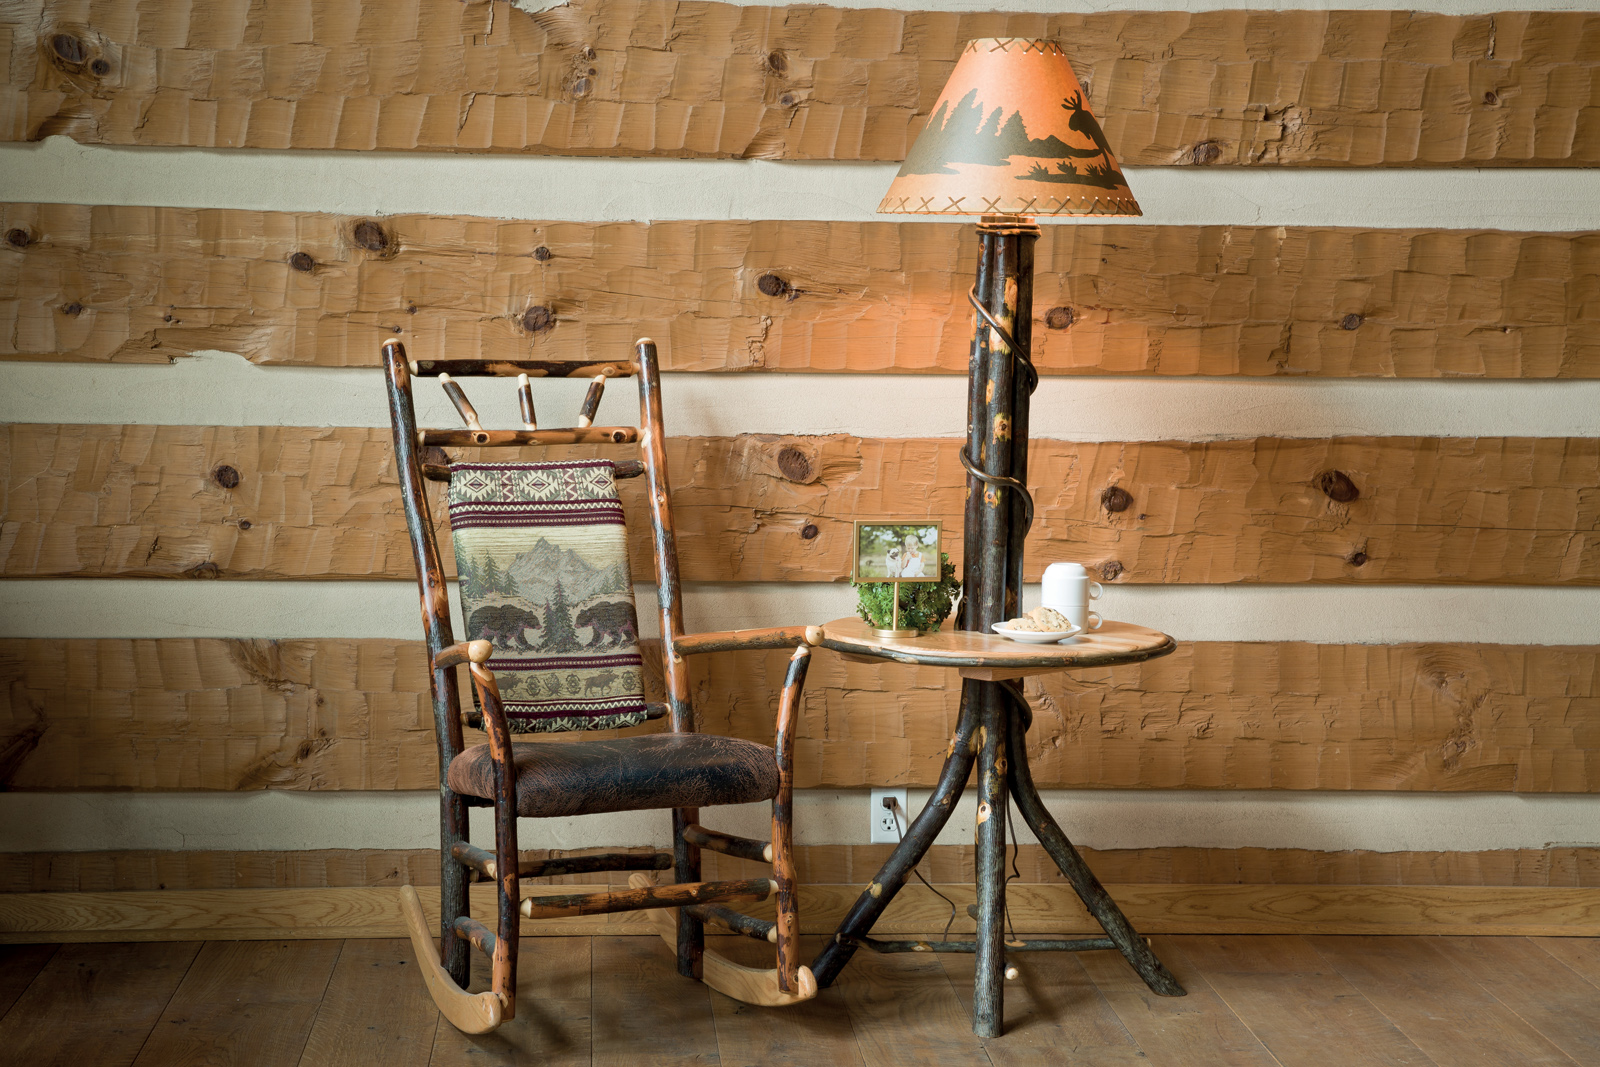 Hickory Collection Living Room Set with a rocking chair and an end table lamp